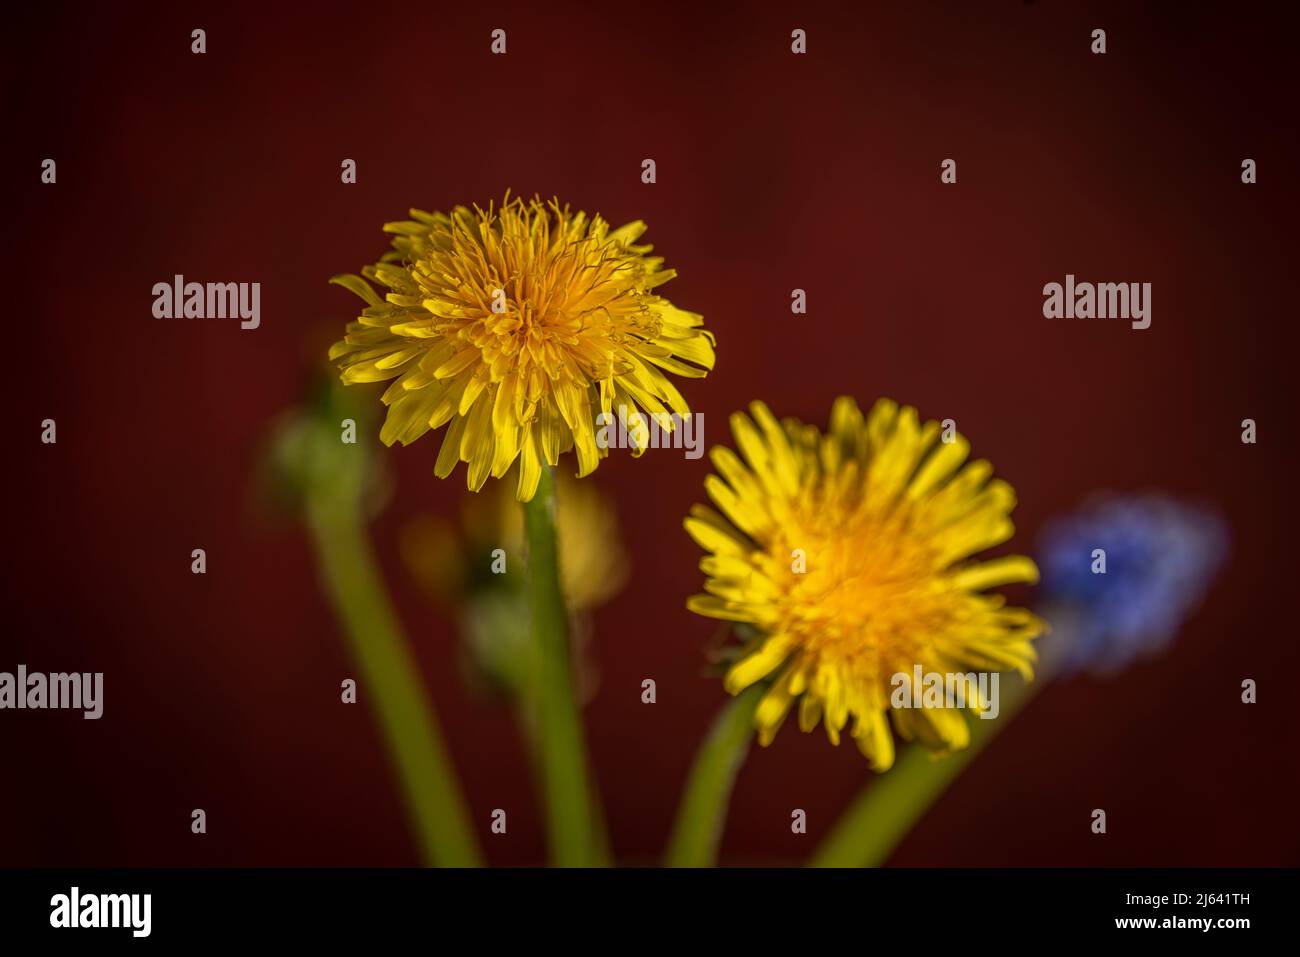 Blue Spike and Dandelion flowers blooms with red vintage color background Stock Photo